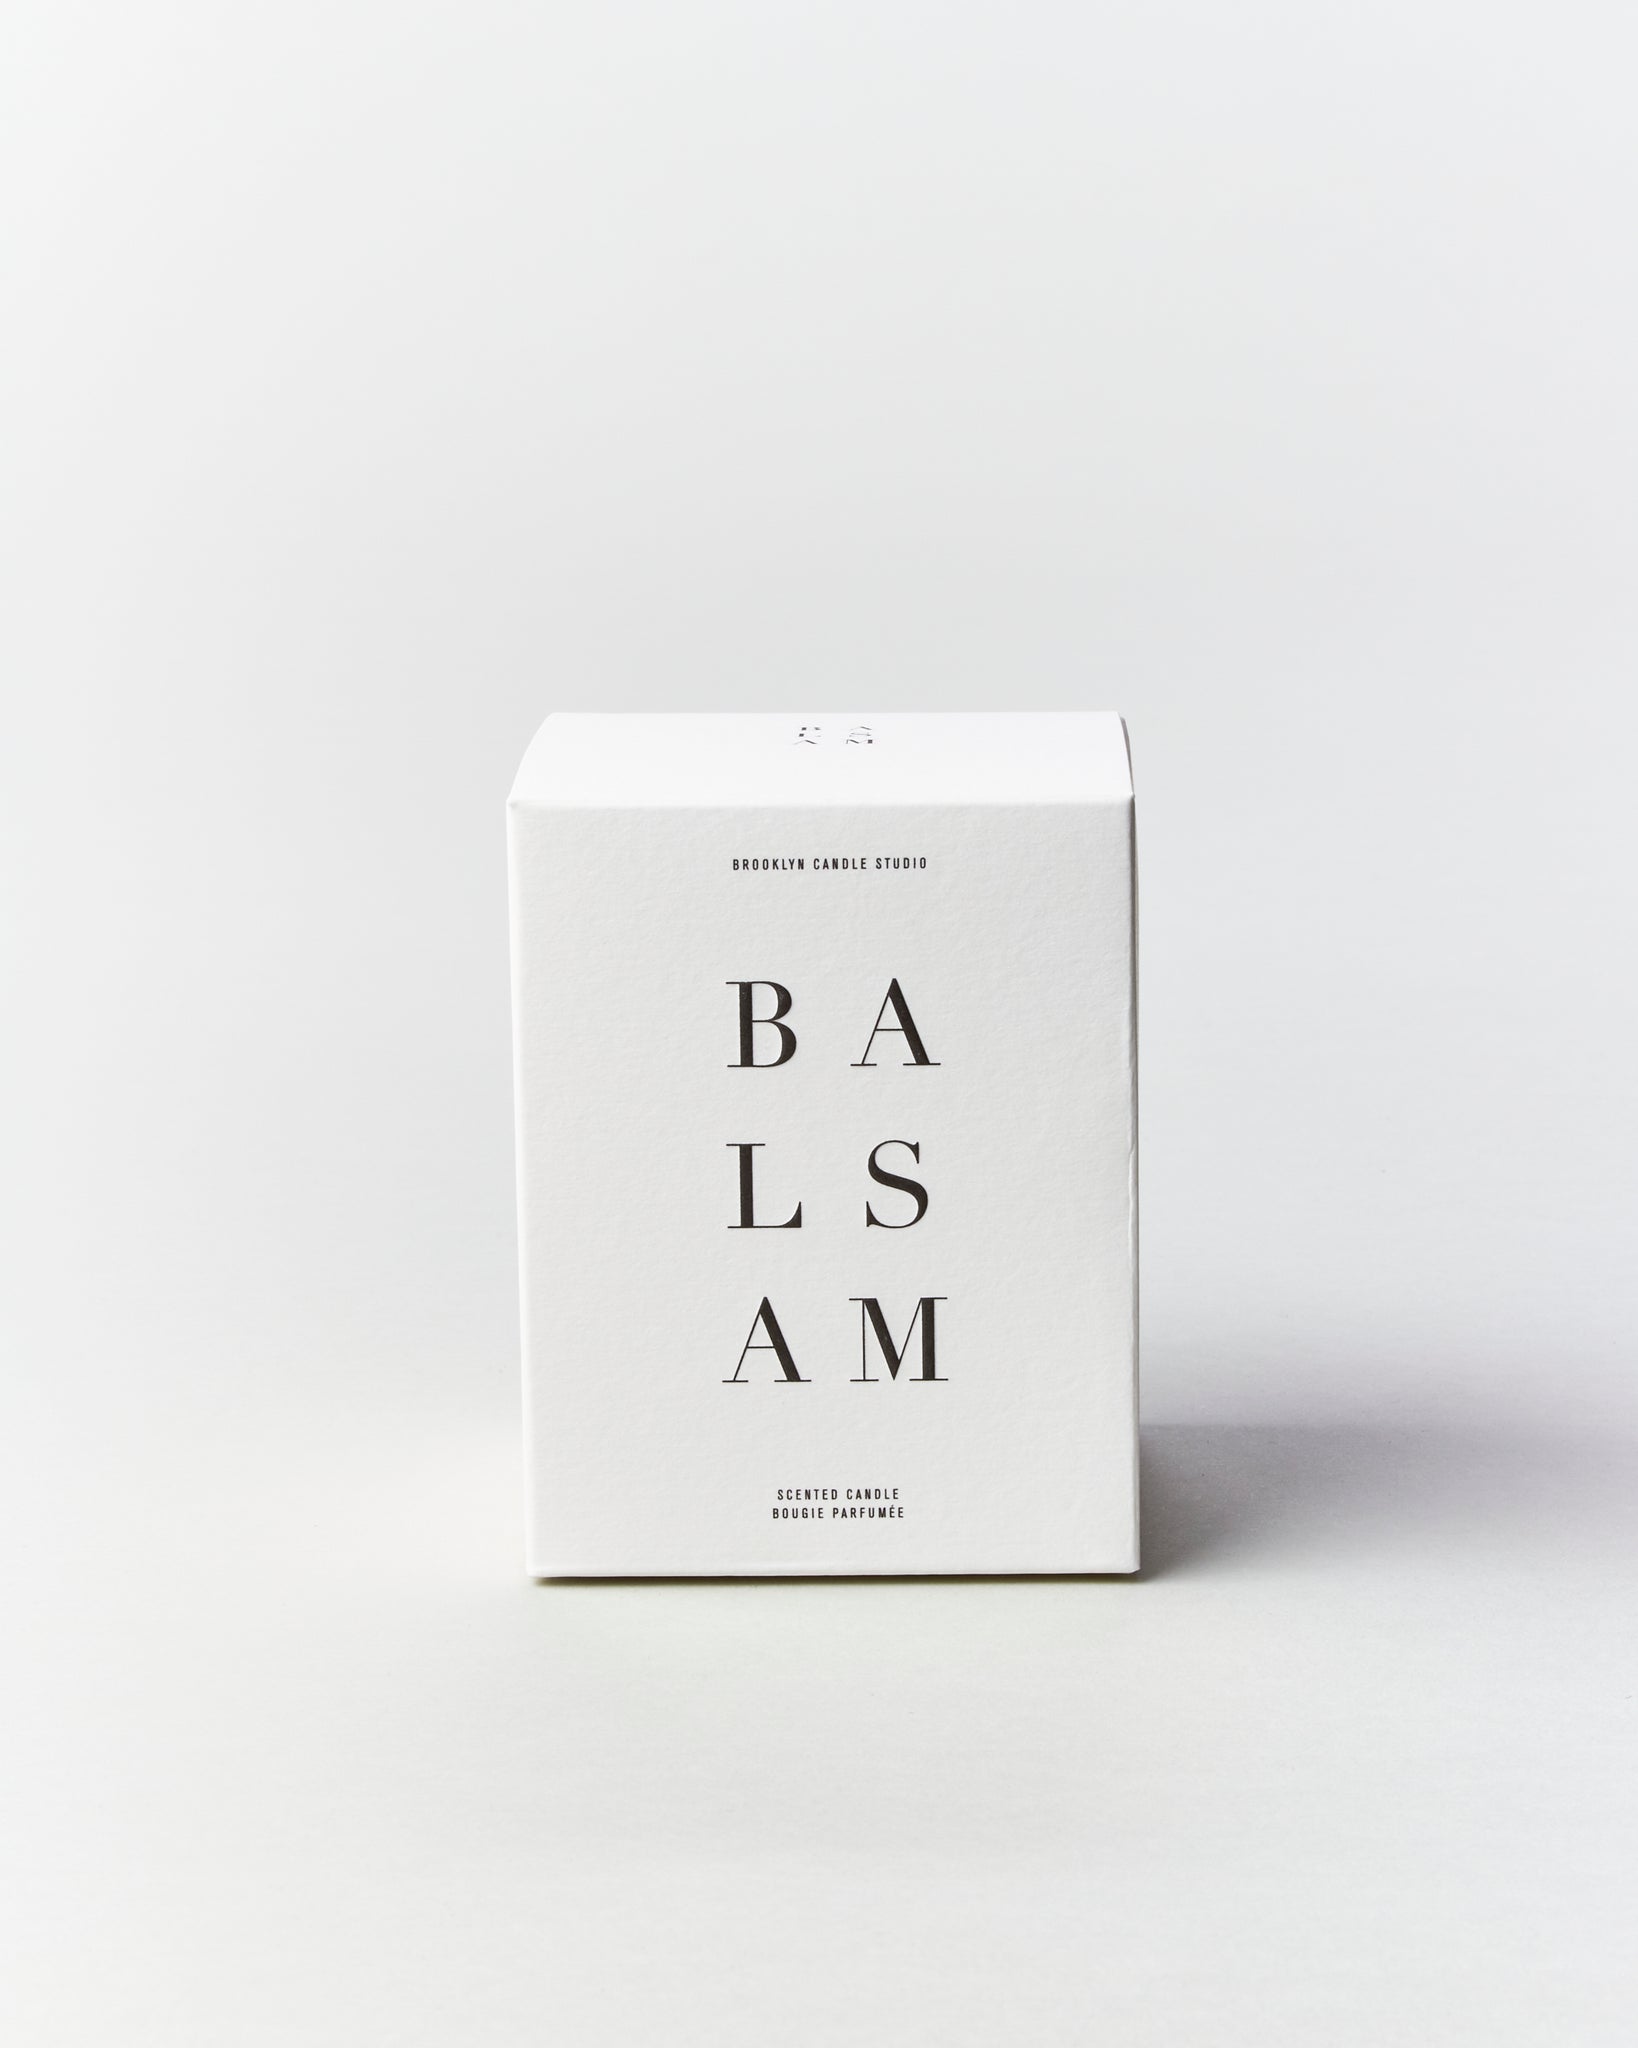 Balsam Scented Candle